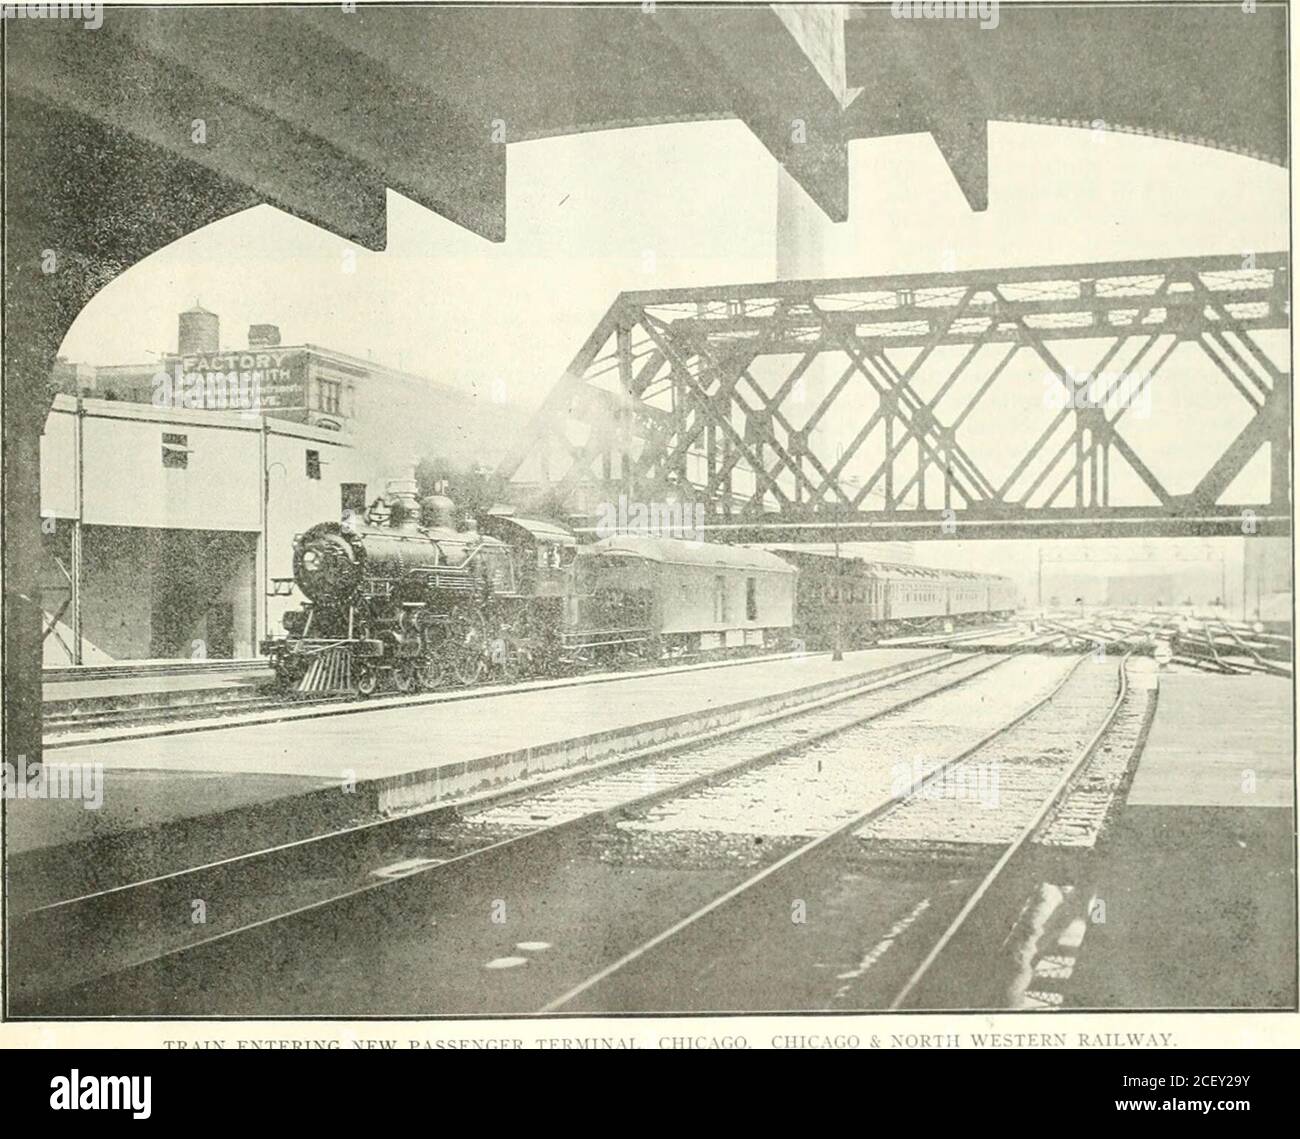 . Railway and Locomotive Engineering. k. Situated inMiddle West. Apply to Box W. W., careof Railway and Locomotive Engineering,New York. 3^i K^o Locomotive ElljmCvrillS A Practical Journal of Motive Power, Rolling Stock and Appliances Vol. XXV. 114 Liberty Street. New York. November. I9I2. Na. II On the Chicago & Northwestern. use and the number of locomotives en- both in the marvel &lt;: . : „ ts It will be universally admitted that Chi- gaged on the leading roads, the Chicago that cluster along the highway as well as cago is the center of the railroad world & Northwestern easily takes its pl Stock Photo